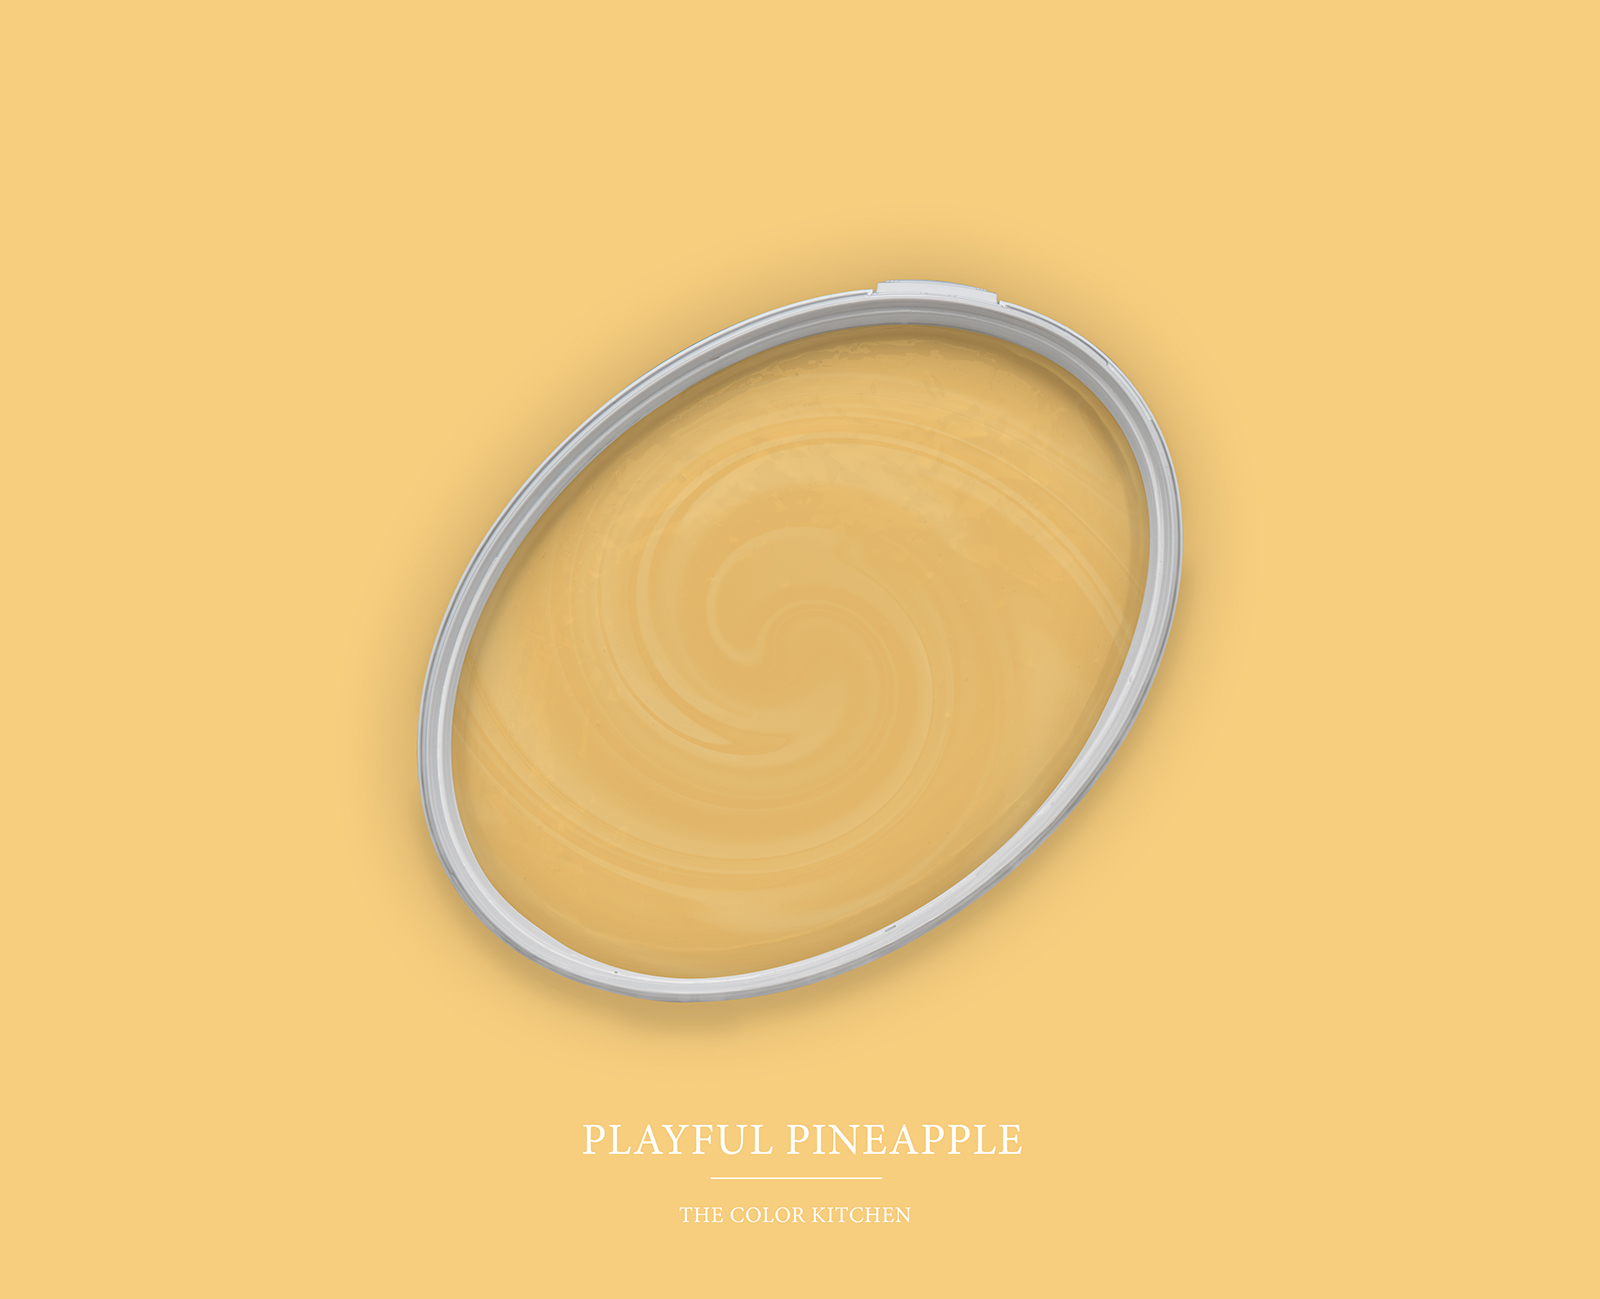             Wall Paint TCK5005 »Playful Pineapple« in friendly yellow – 2.5 litre
        